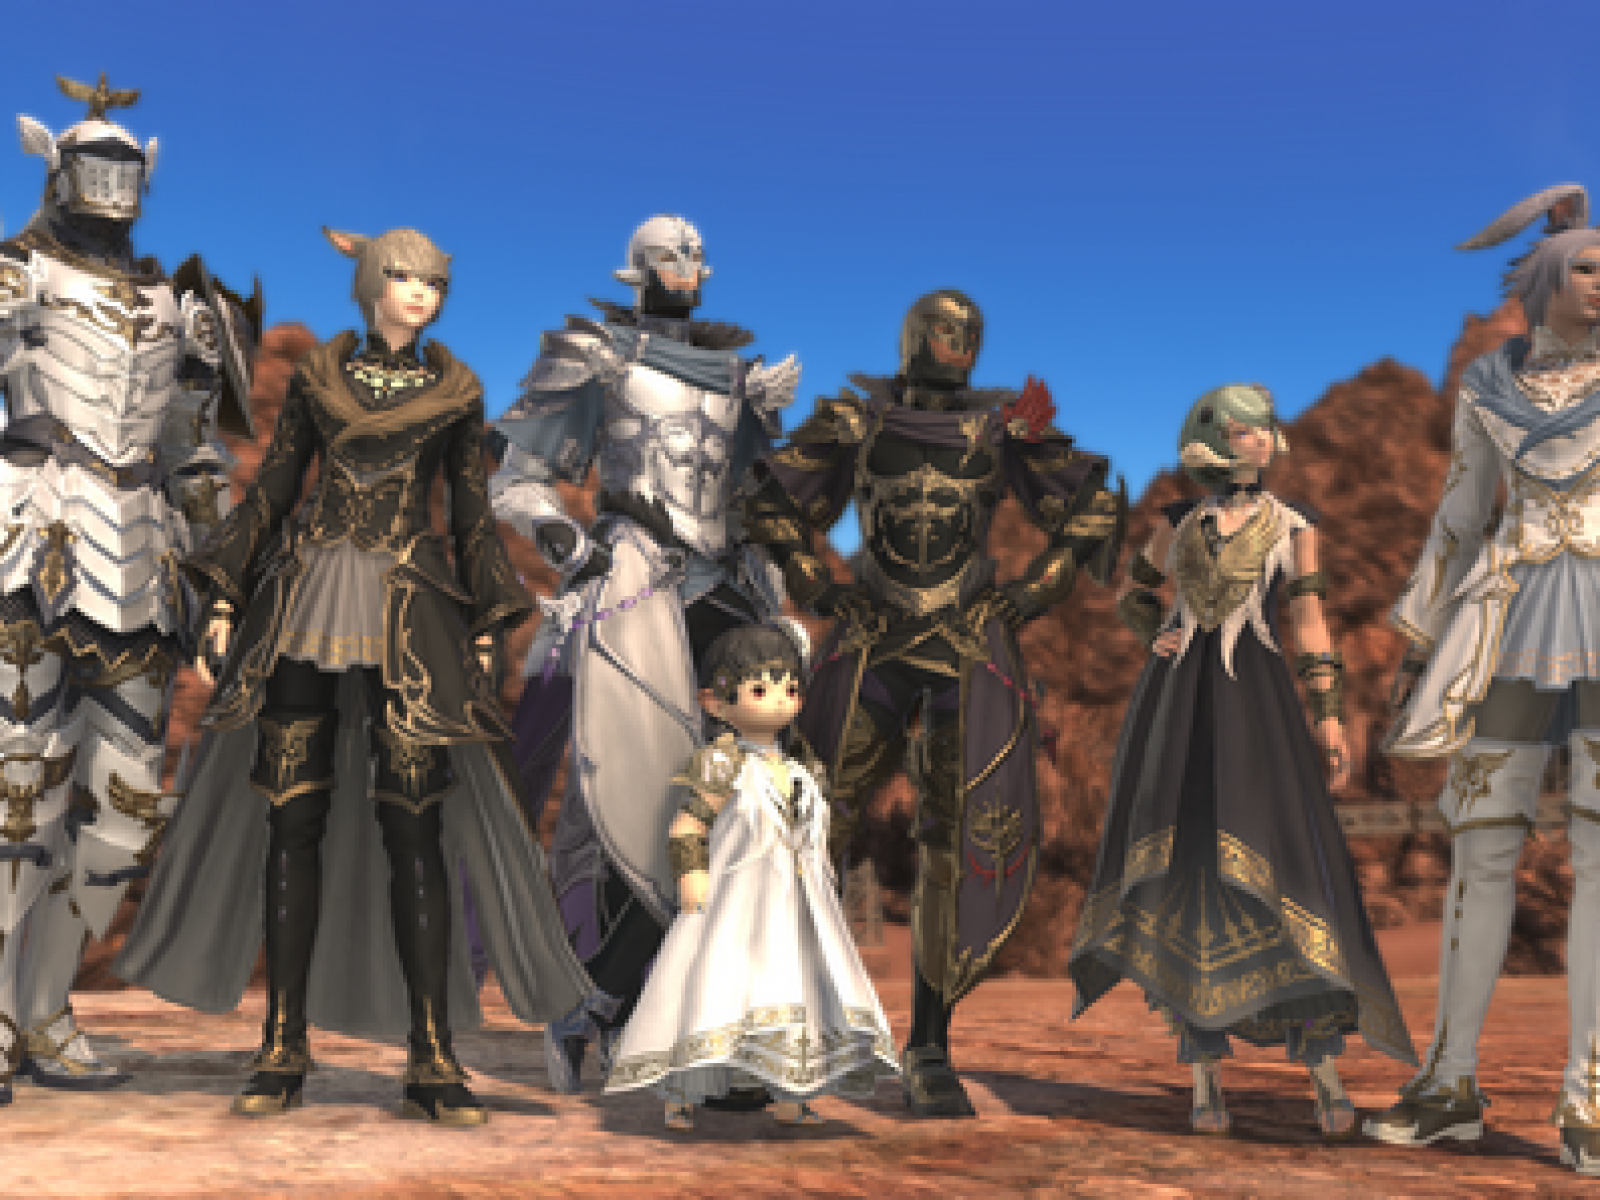 Ffxiv 5 01 Patch Notes First Shadowbringers Update Adds New Quests And Eden Raid Dungeon